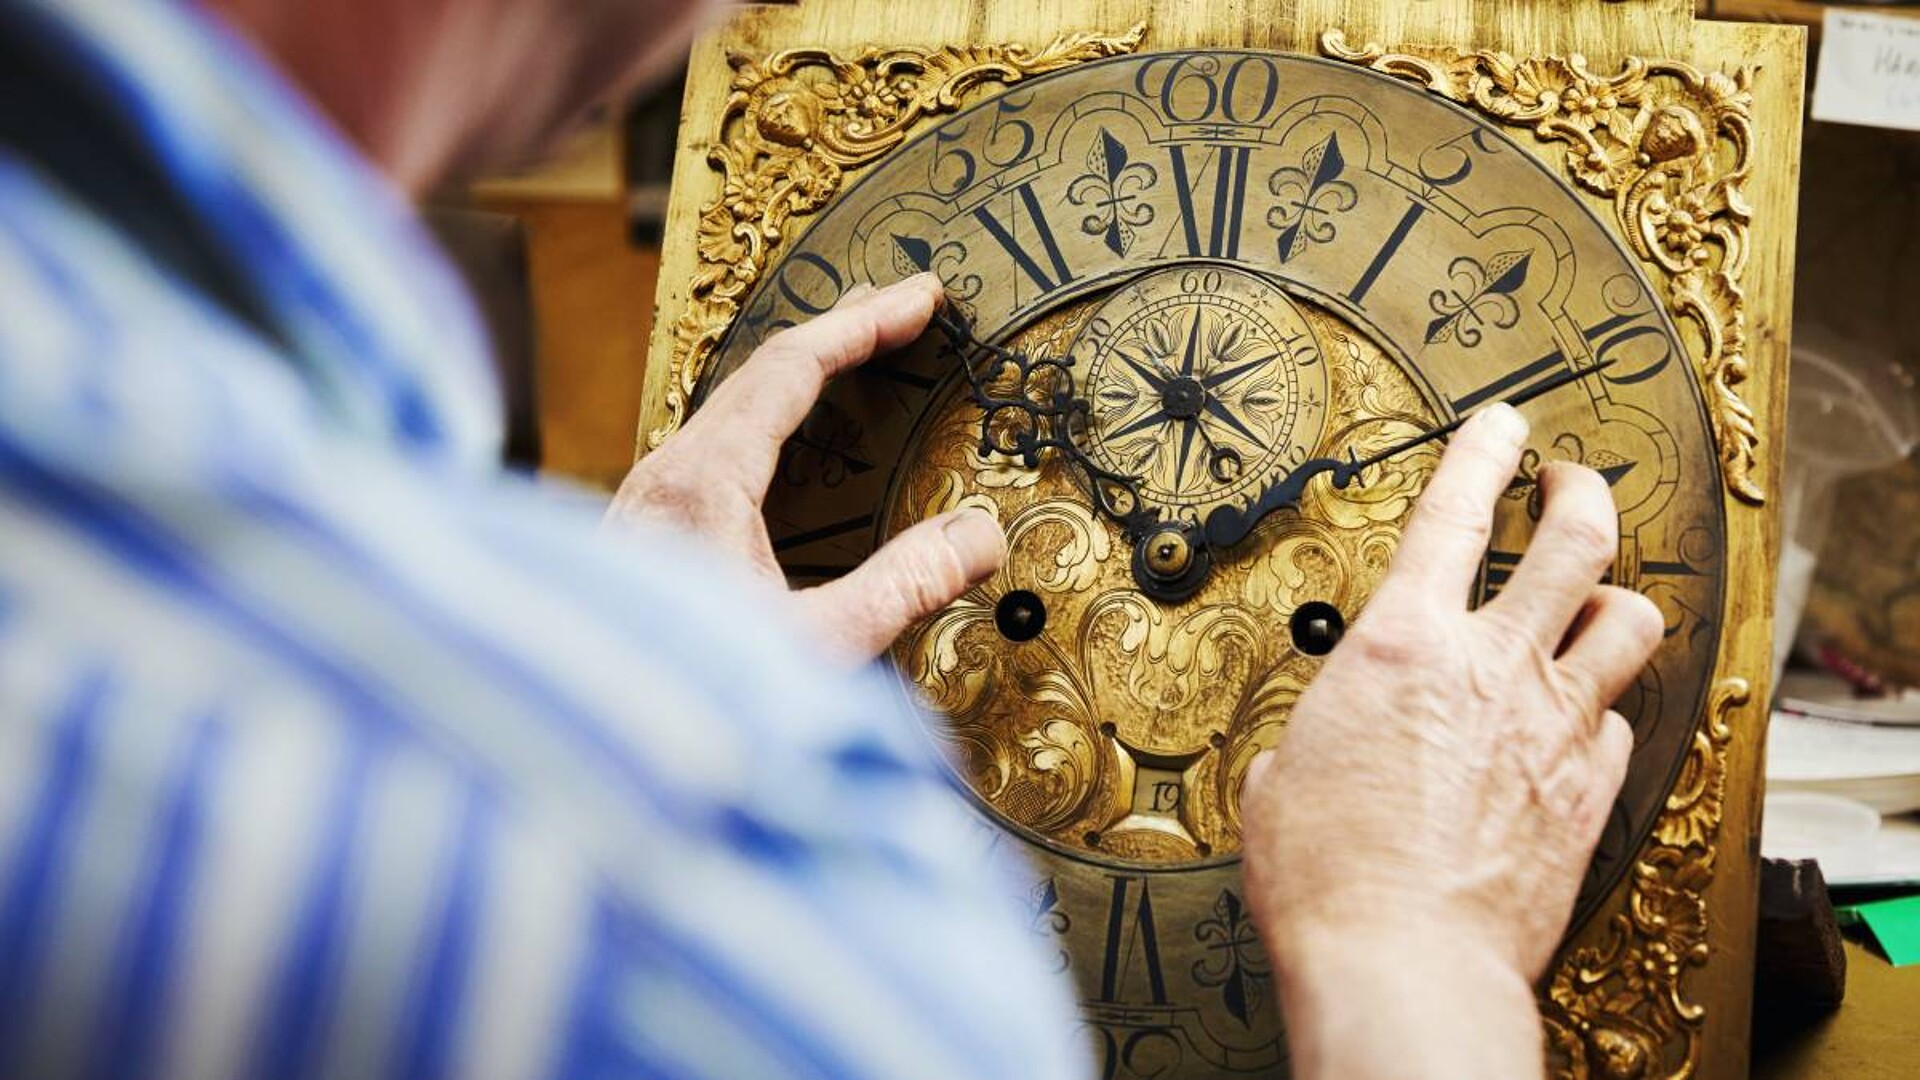 Antique Clocks: A Guide to Value, Styles and Proper Care - Invaluable